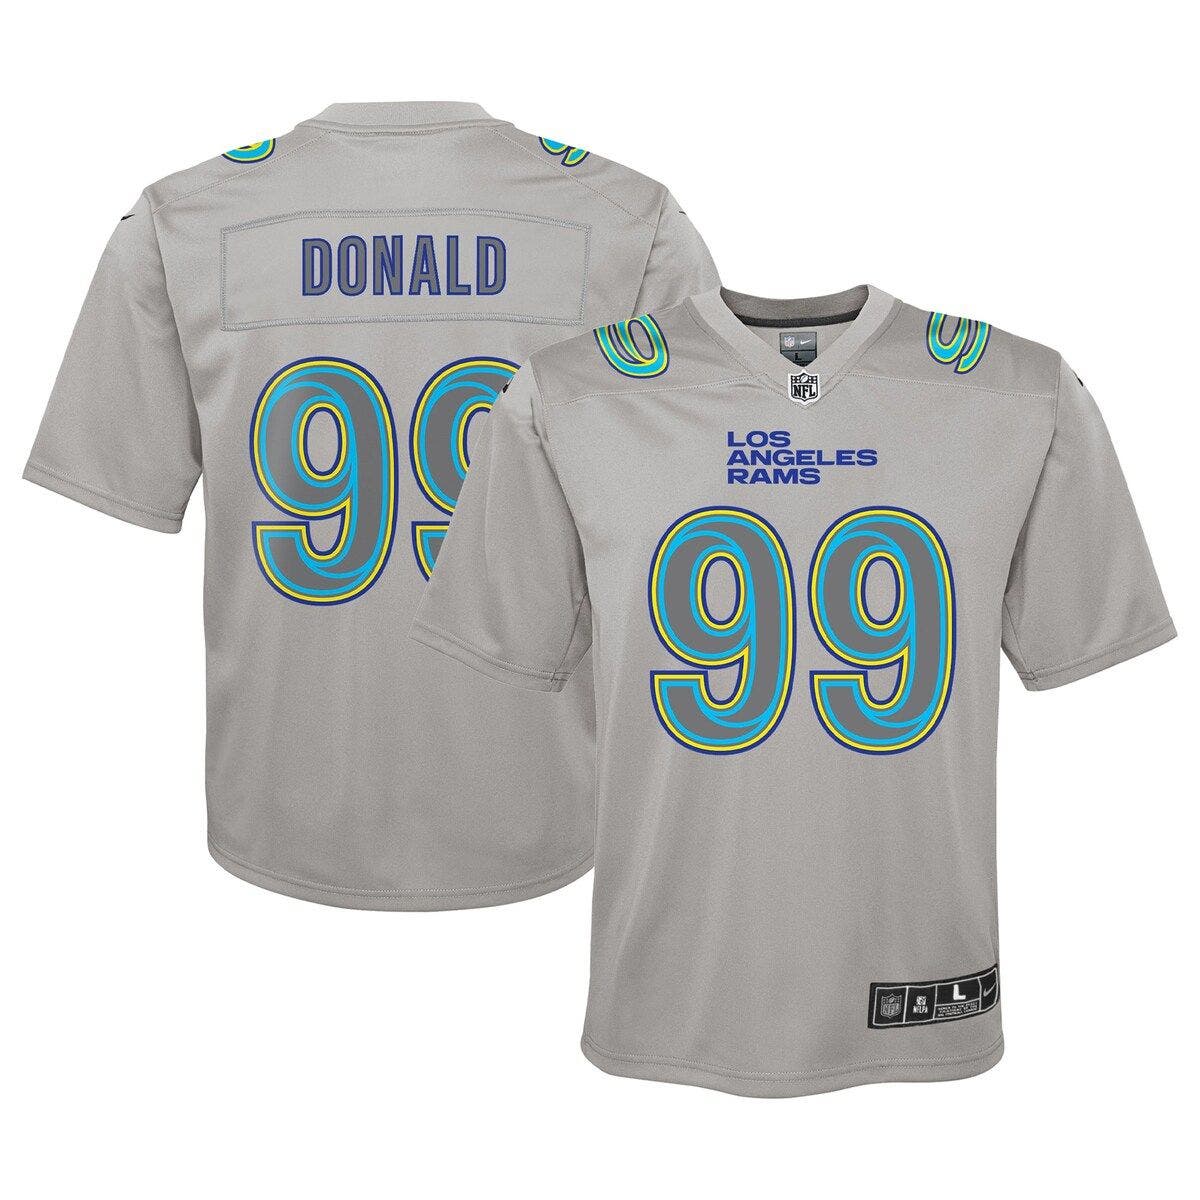 Los Angeles Rams Aaron Donald color rush jersey